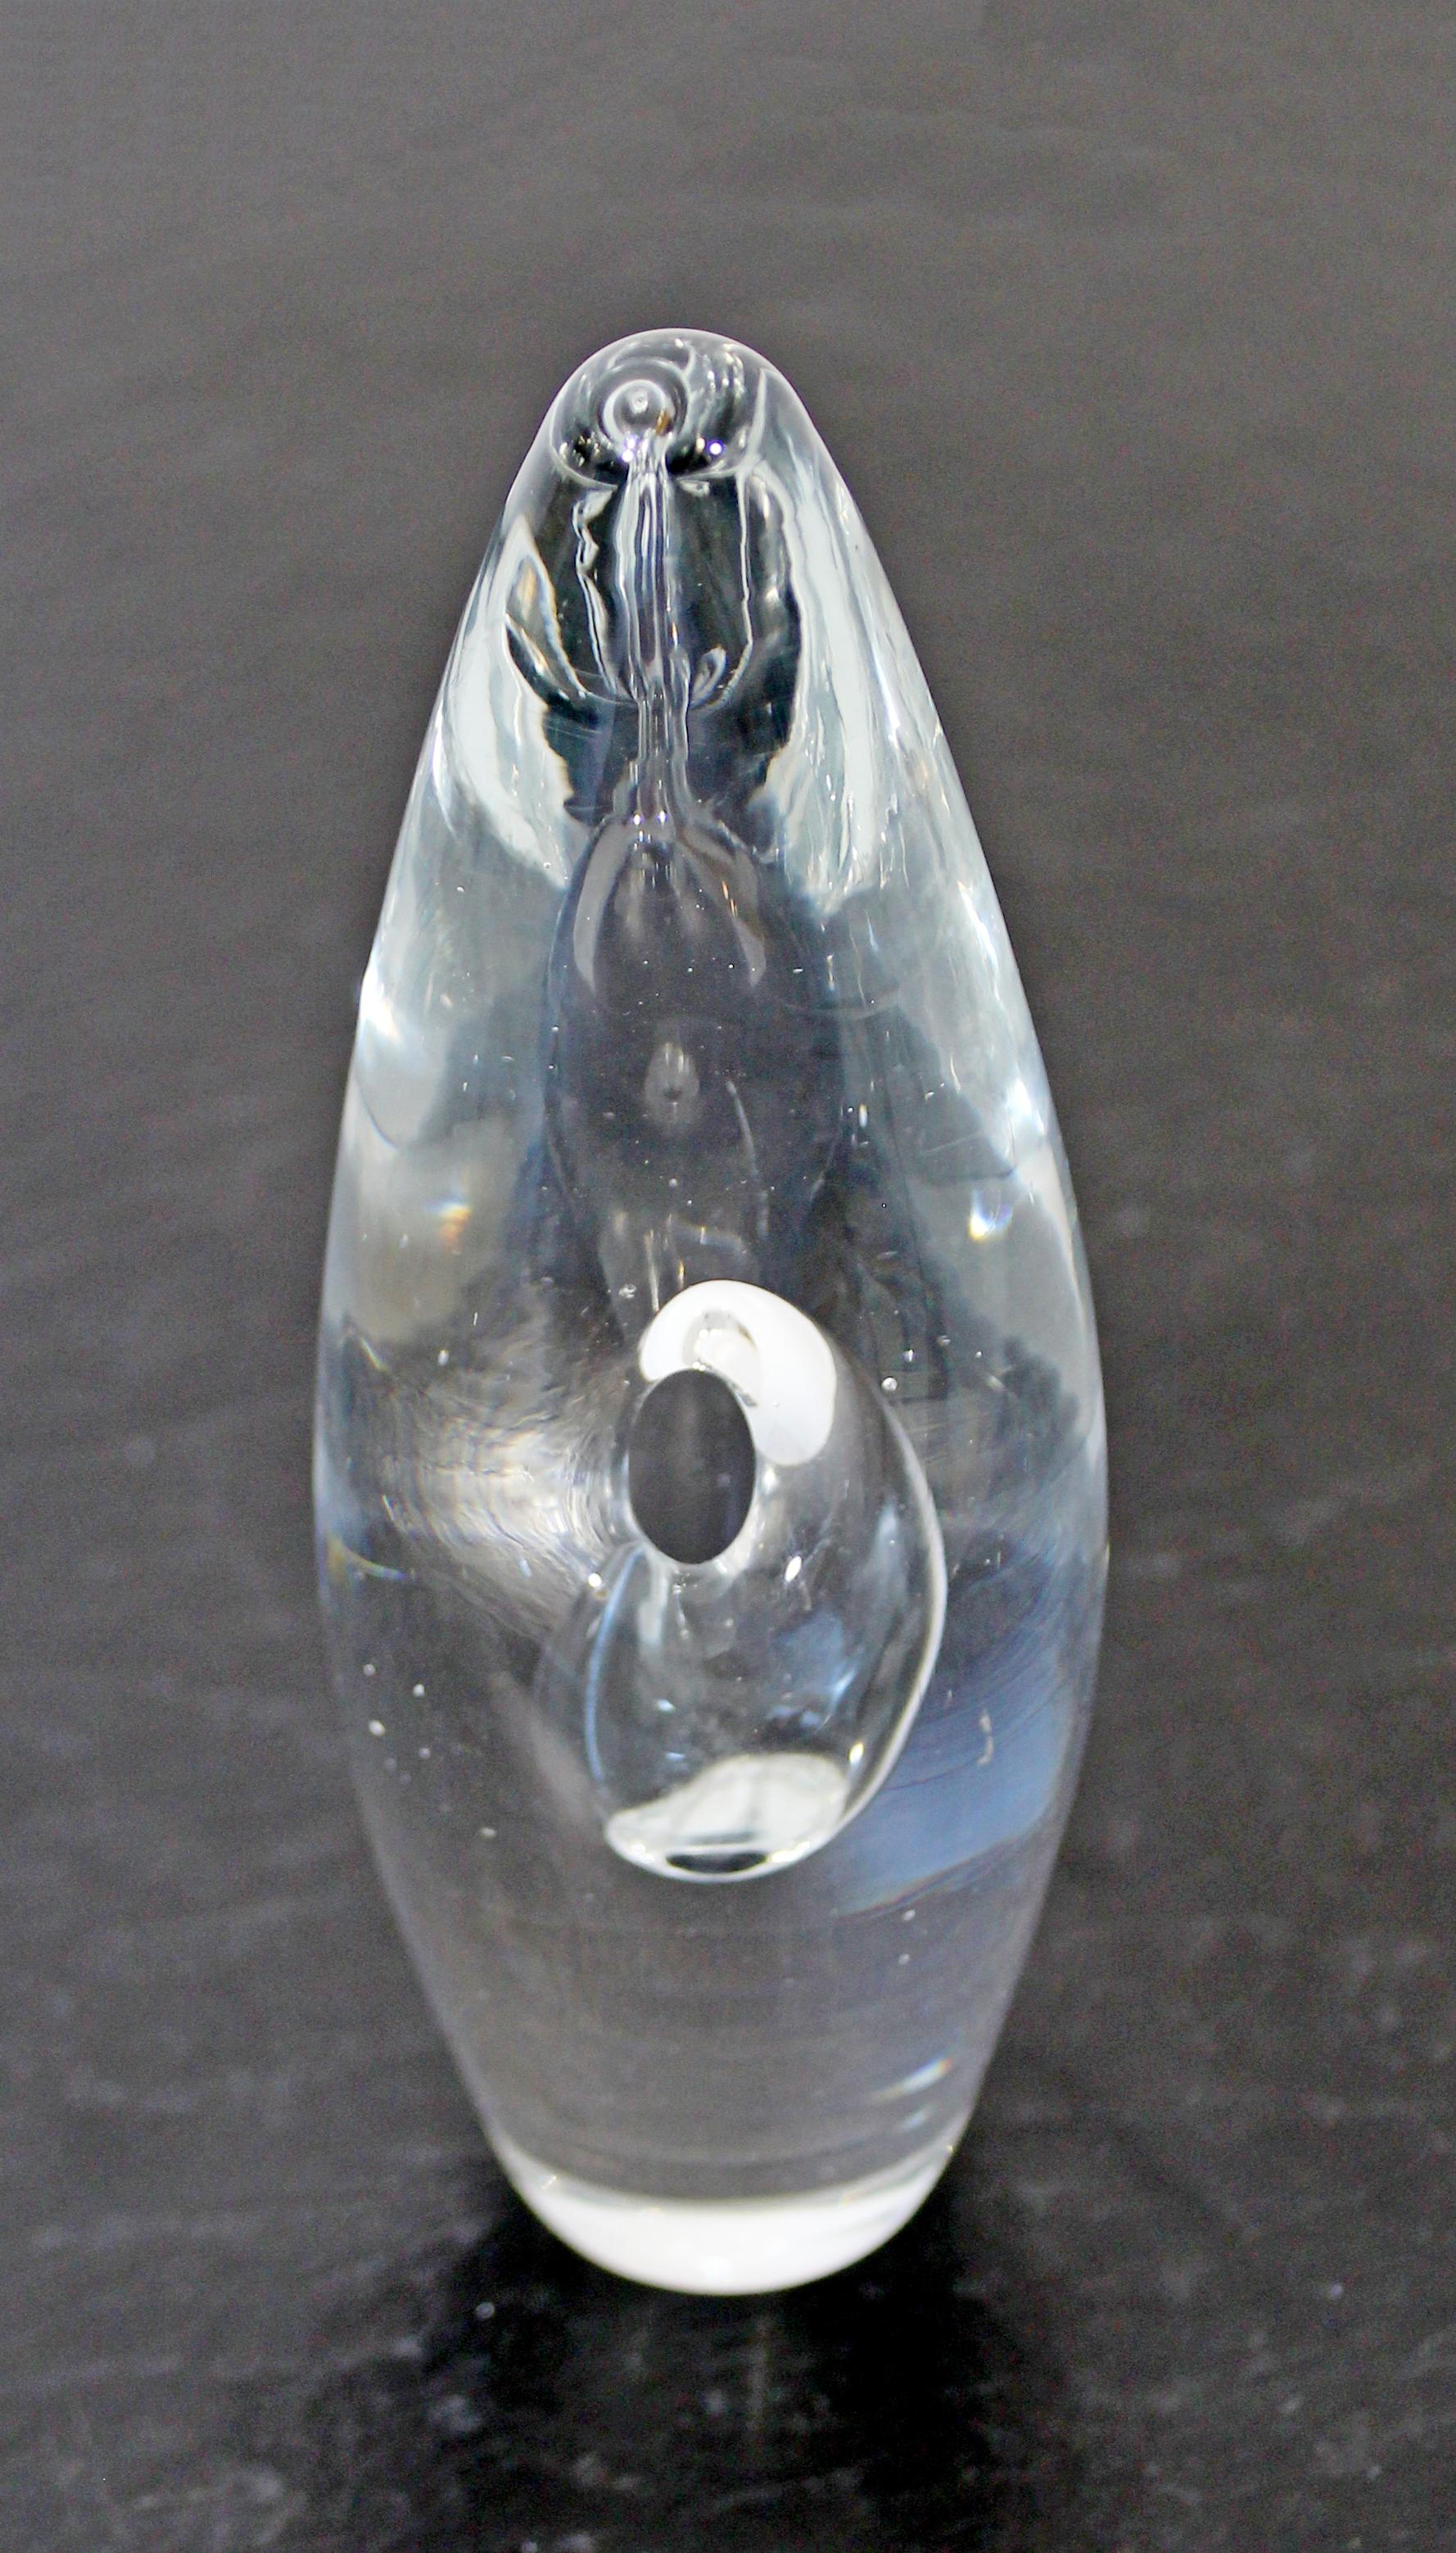 For your consideration is a small and sweet, mould blown, glass Orkidea or orchid vase, signed by Timo Sarpaneva for Iitala, made in Finland, dated 1958. In excellent condition. The dimensions are 2.25